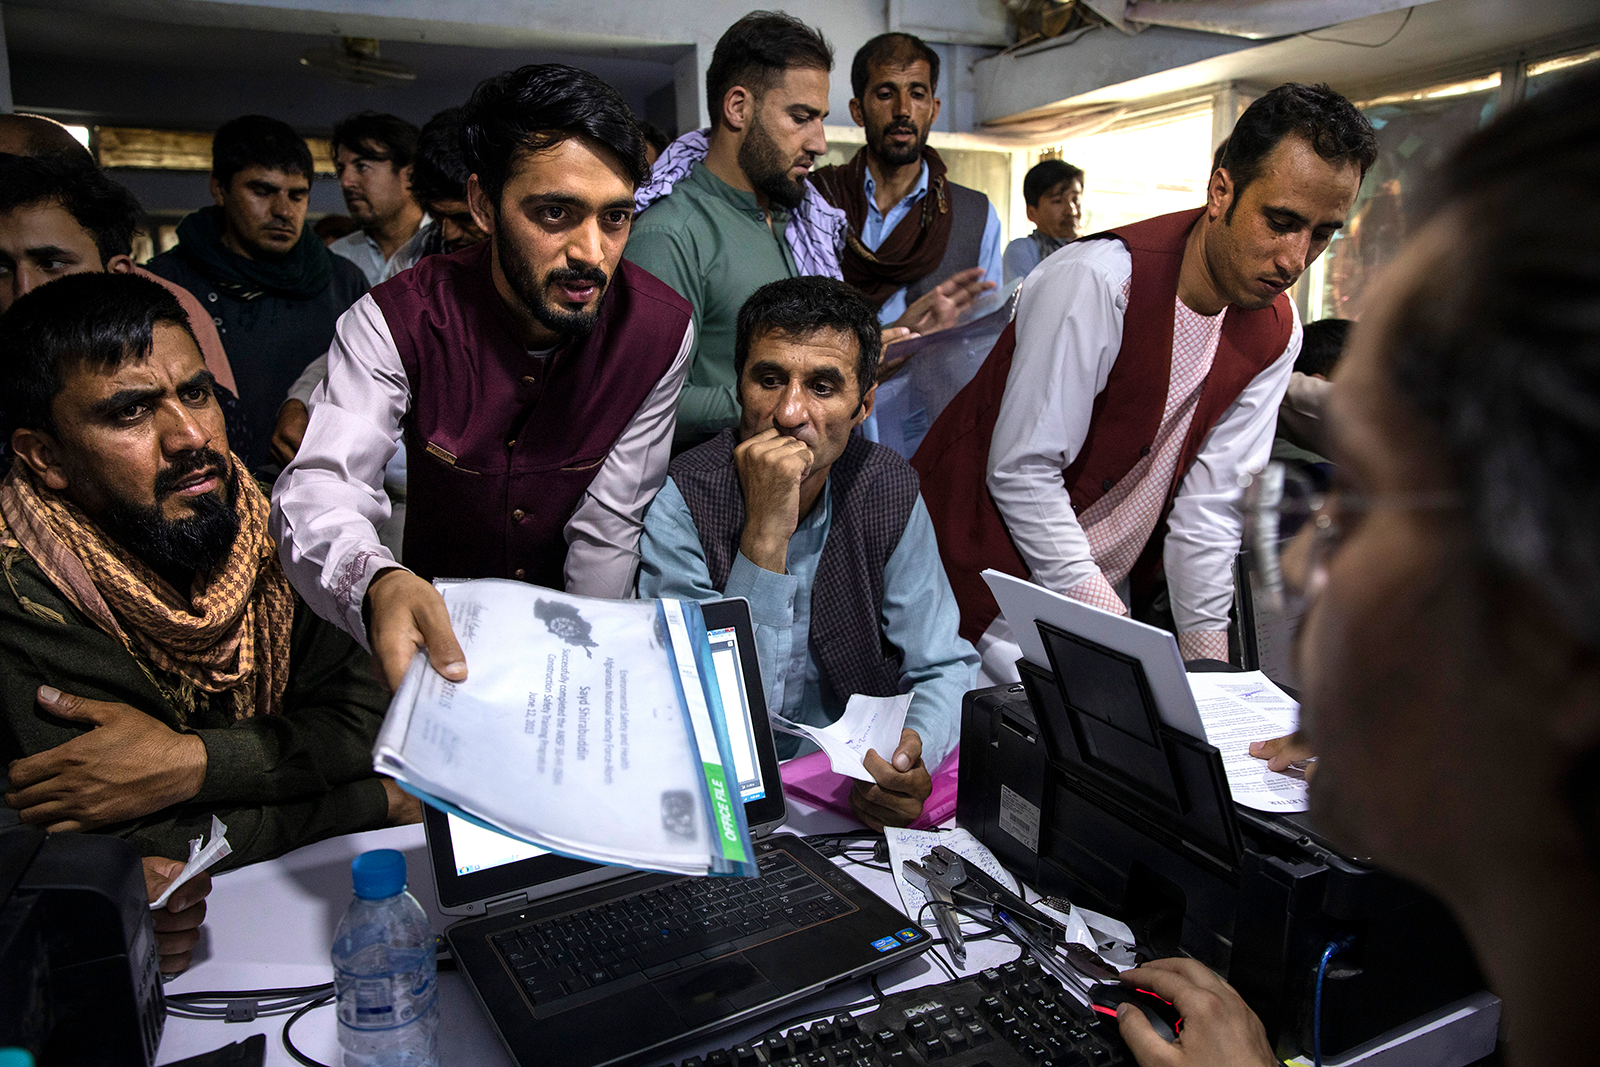 Afghan Special Immigrant Visa applicants crowd into the Herat Kabul Internet cafe seeking help applying for the SIV program on August 8 in Kabul.